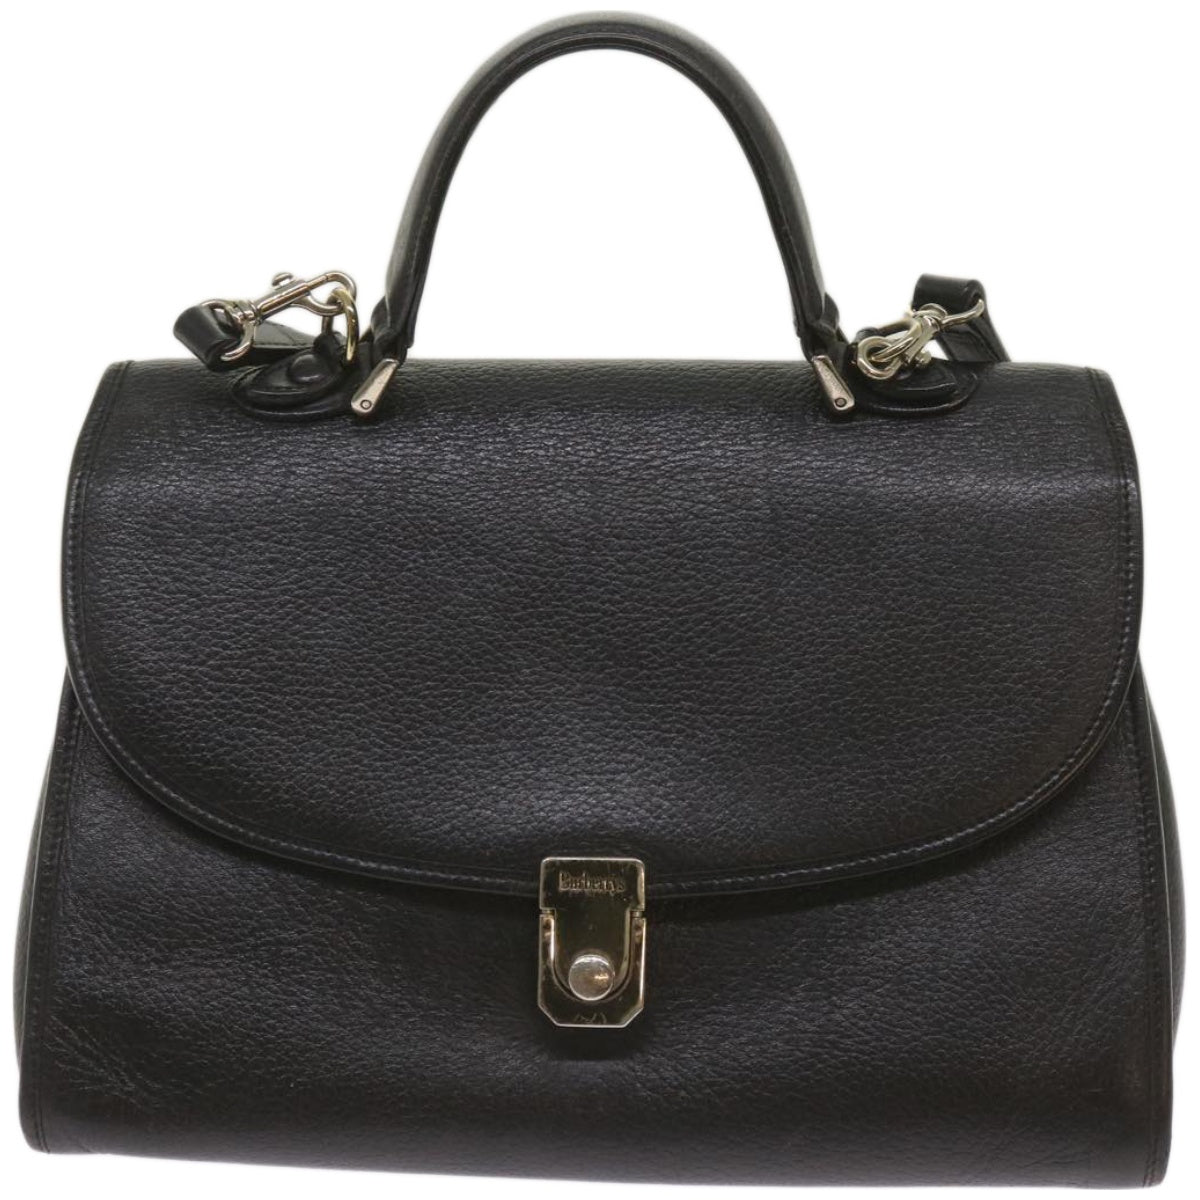 Burberrys Hand Bag Leather 2way Black Auth 68158 - 0